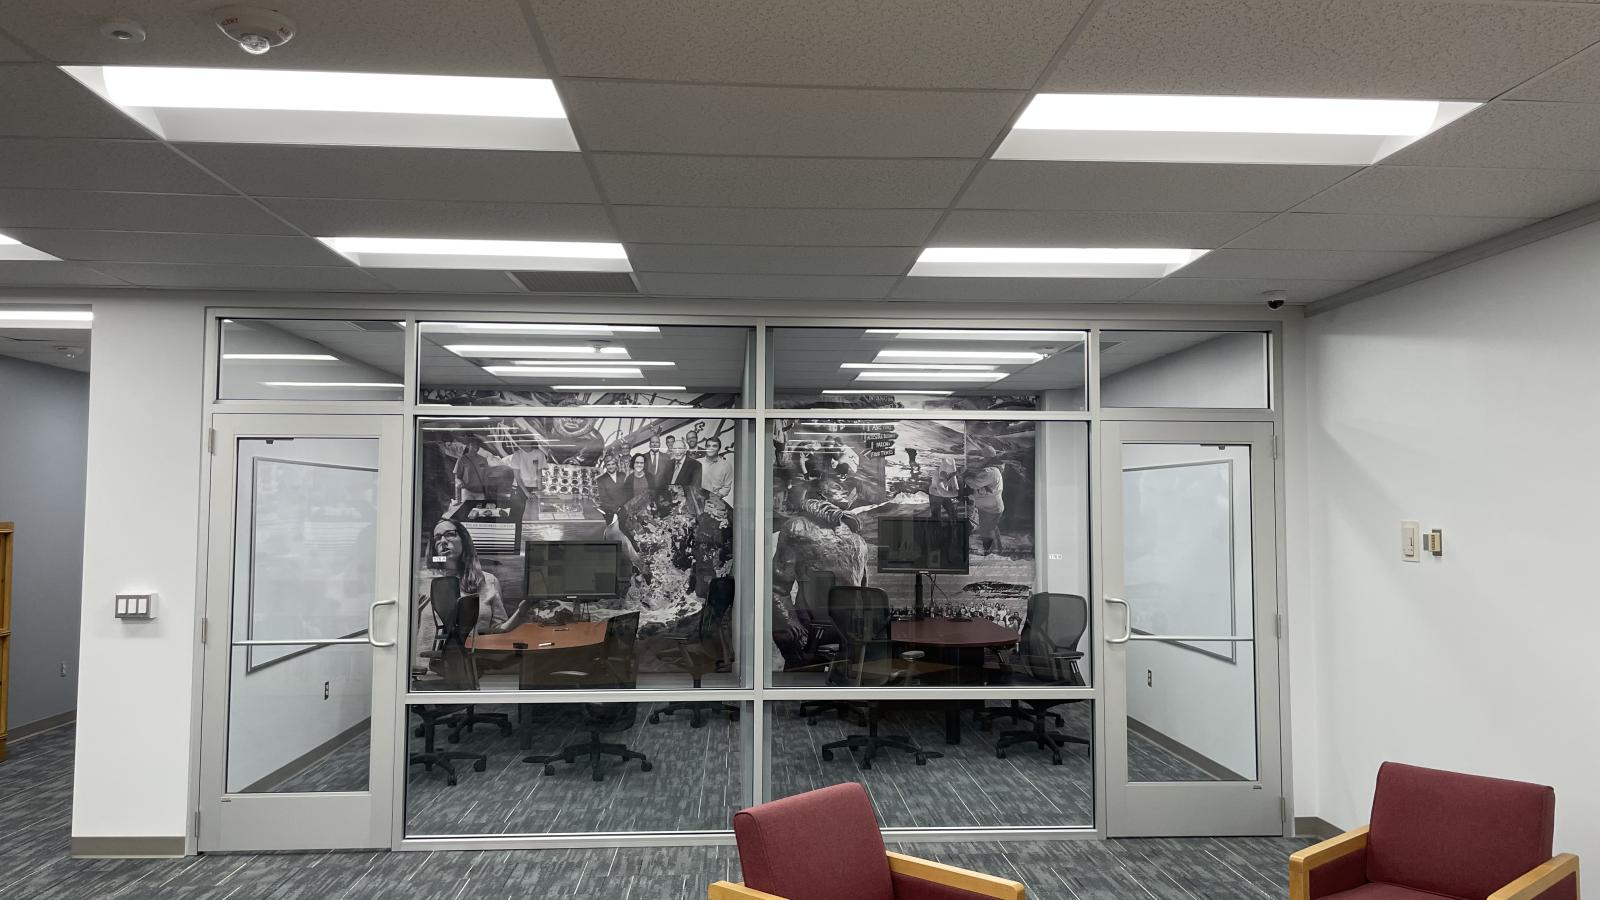 image taken from inside the Goldthwait Polar Library in the far back 2 glass enclosed quiet rooms  with a wall length vinyl drape of images on the back wall with some chairs and desk inside and gray carpet, white walls and a light wood table and 2 lounge chairs with red fabric in foreground on bottom right 